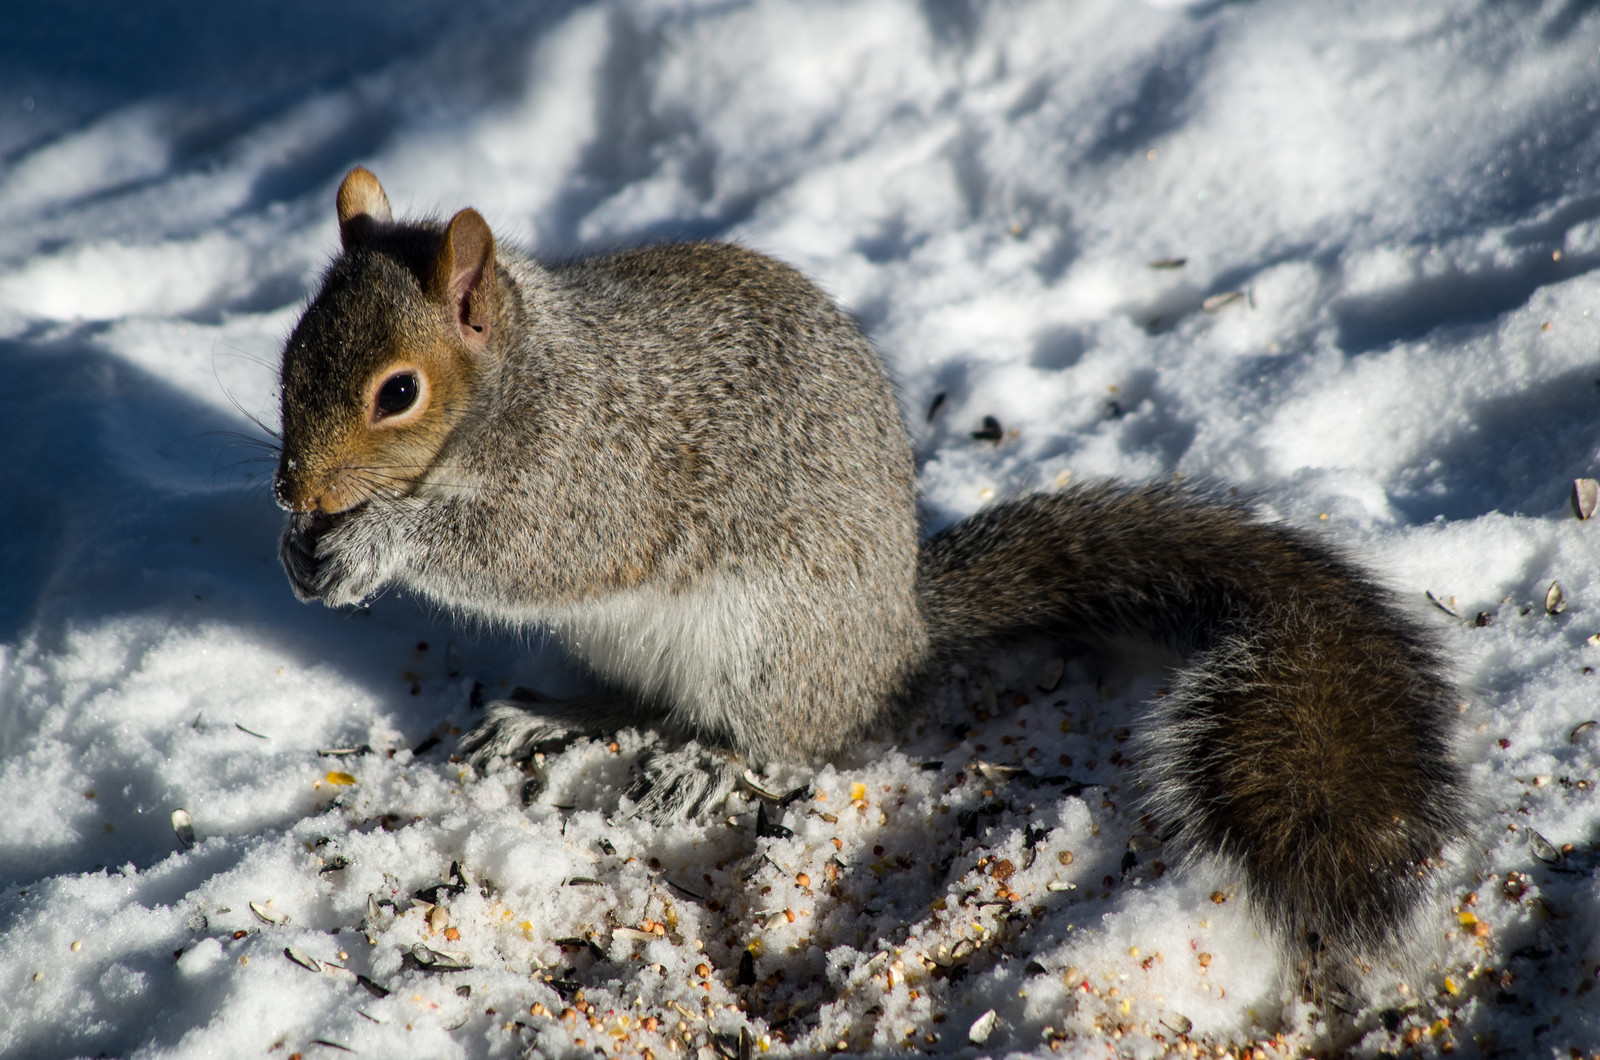 Day 24 – Squirrel Snacks